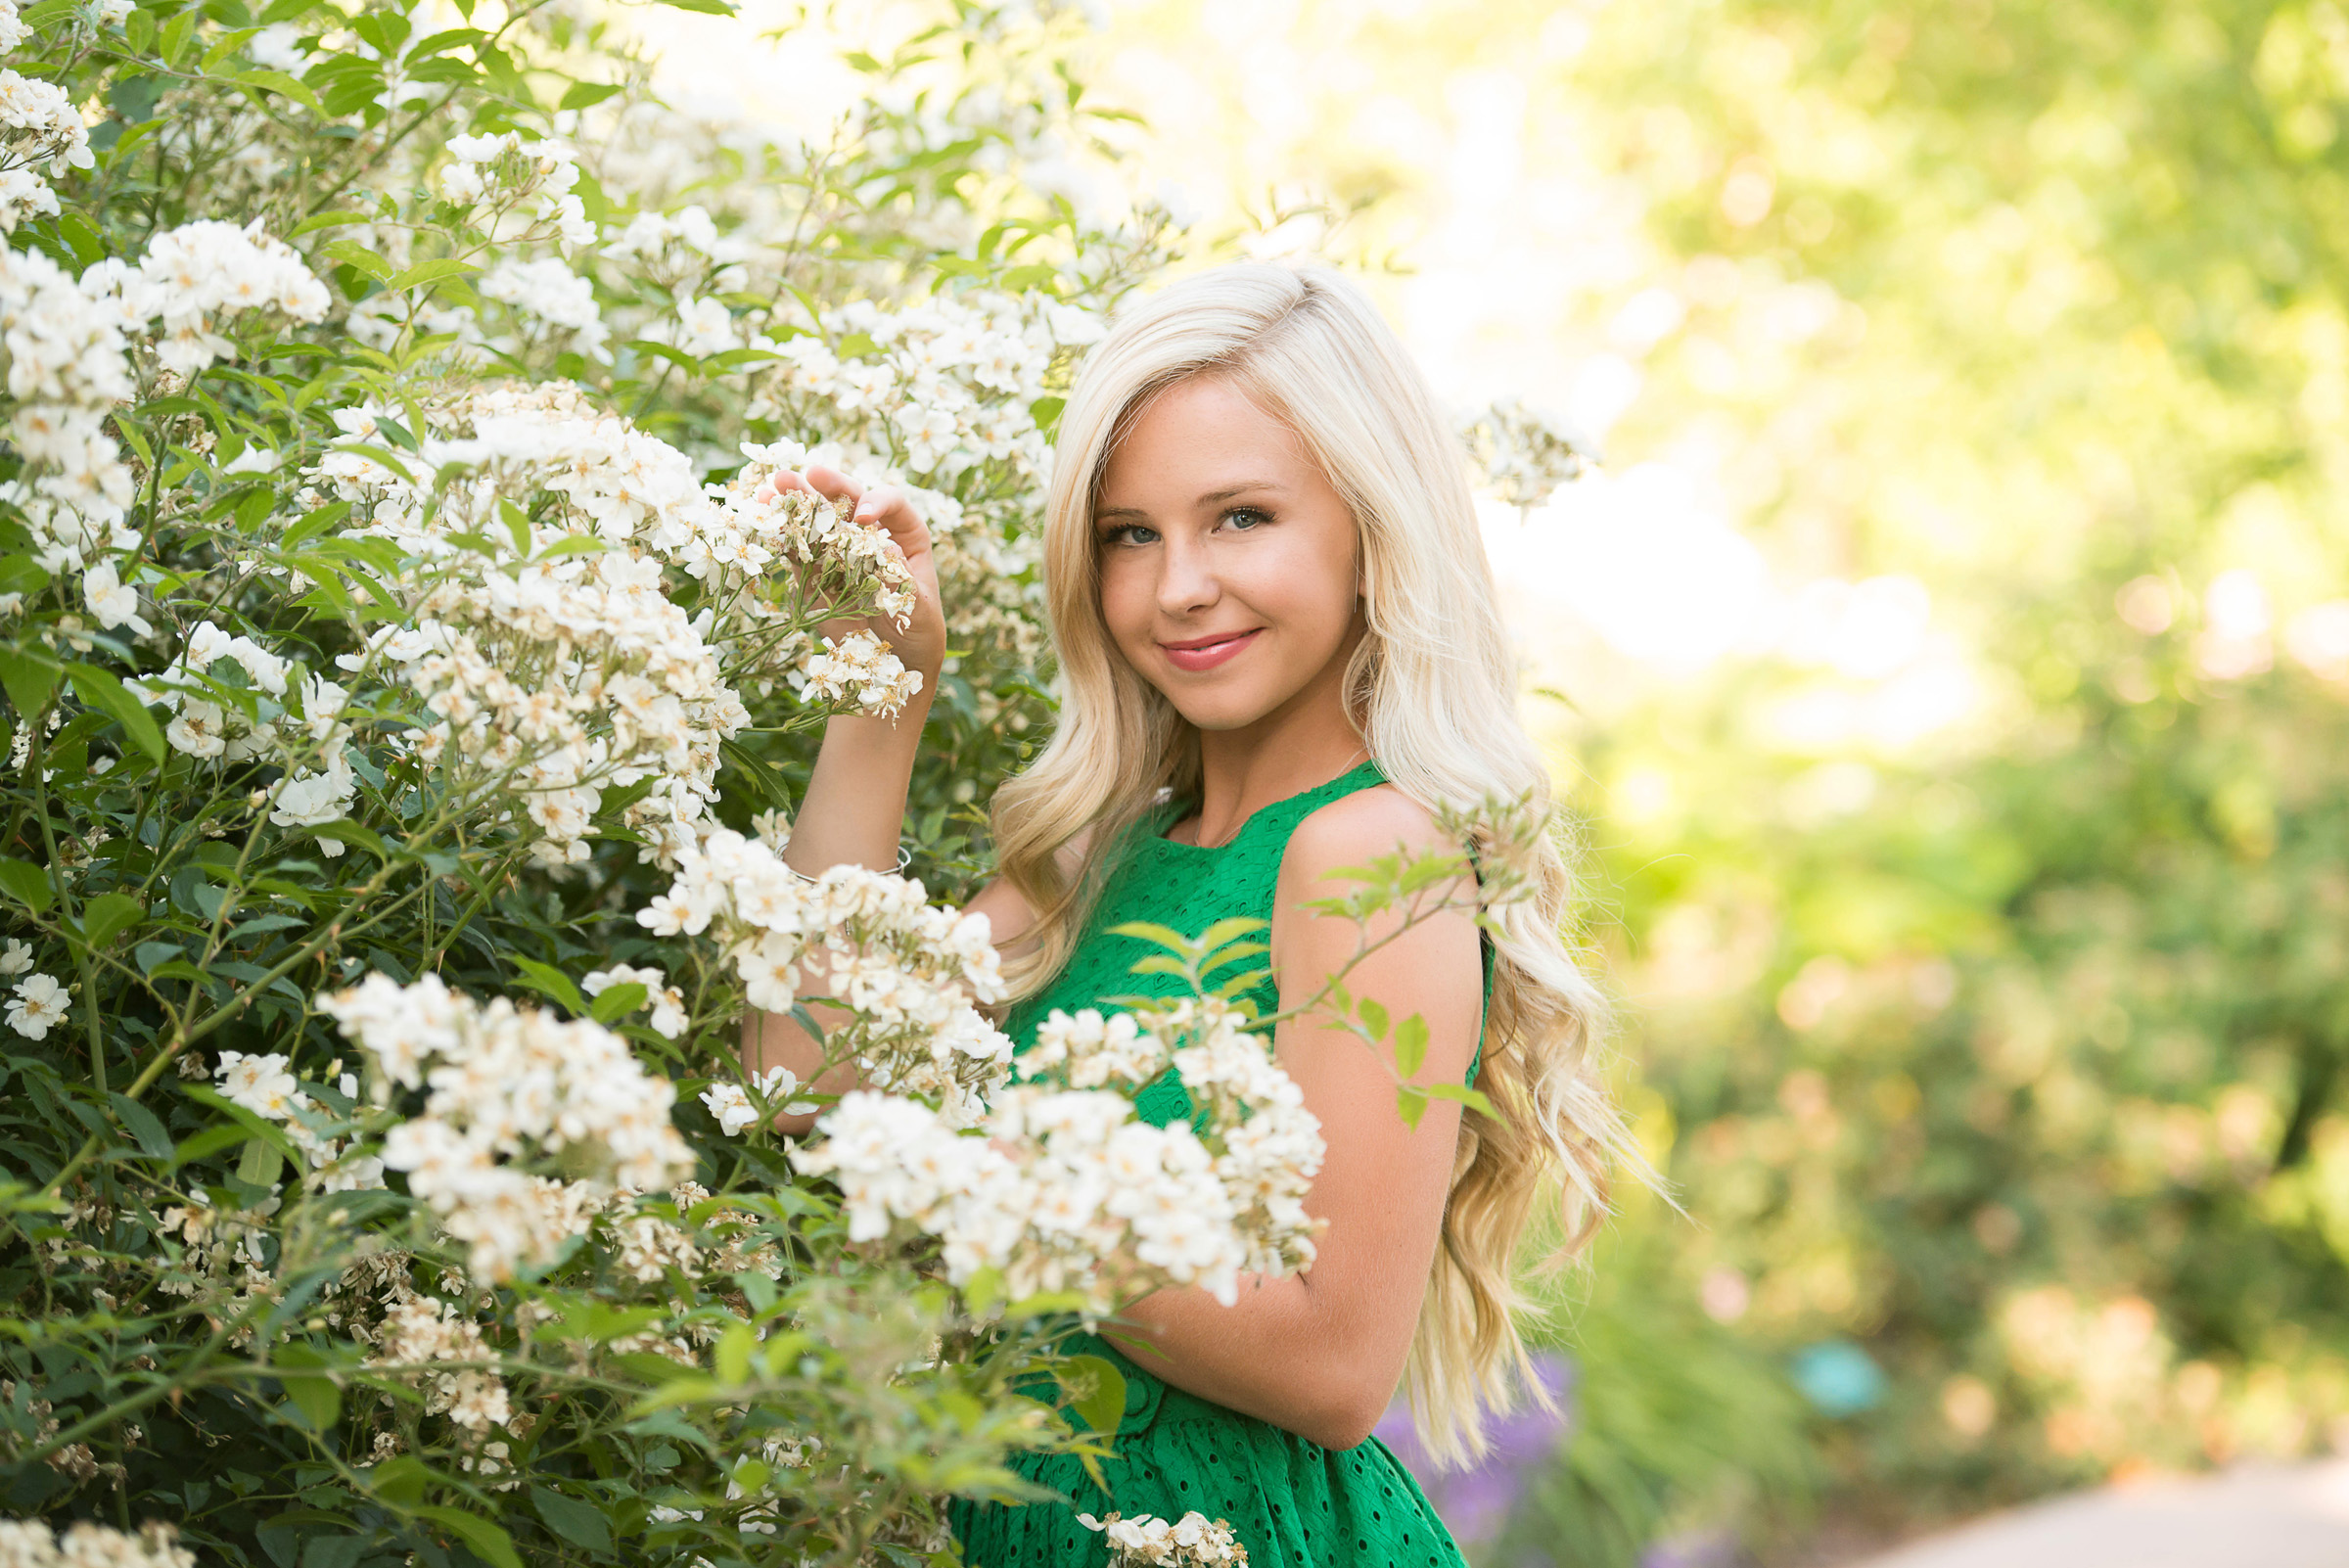 Girl wearing green dress standing by white roses in a garden